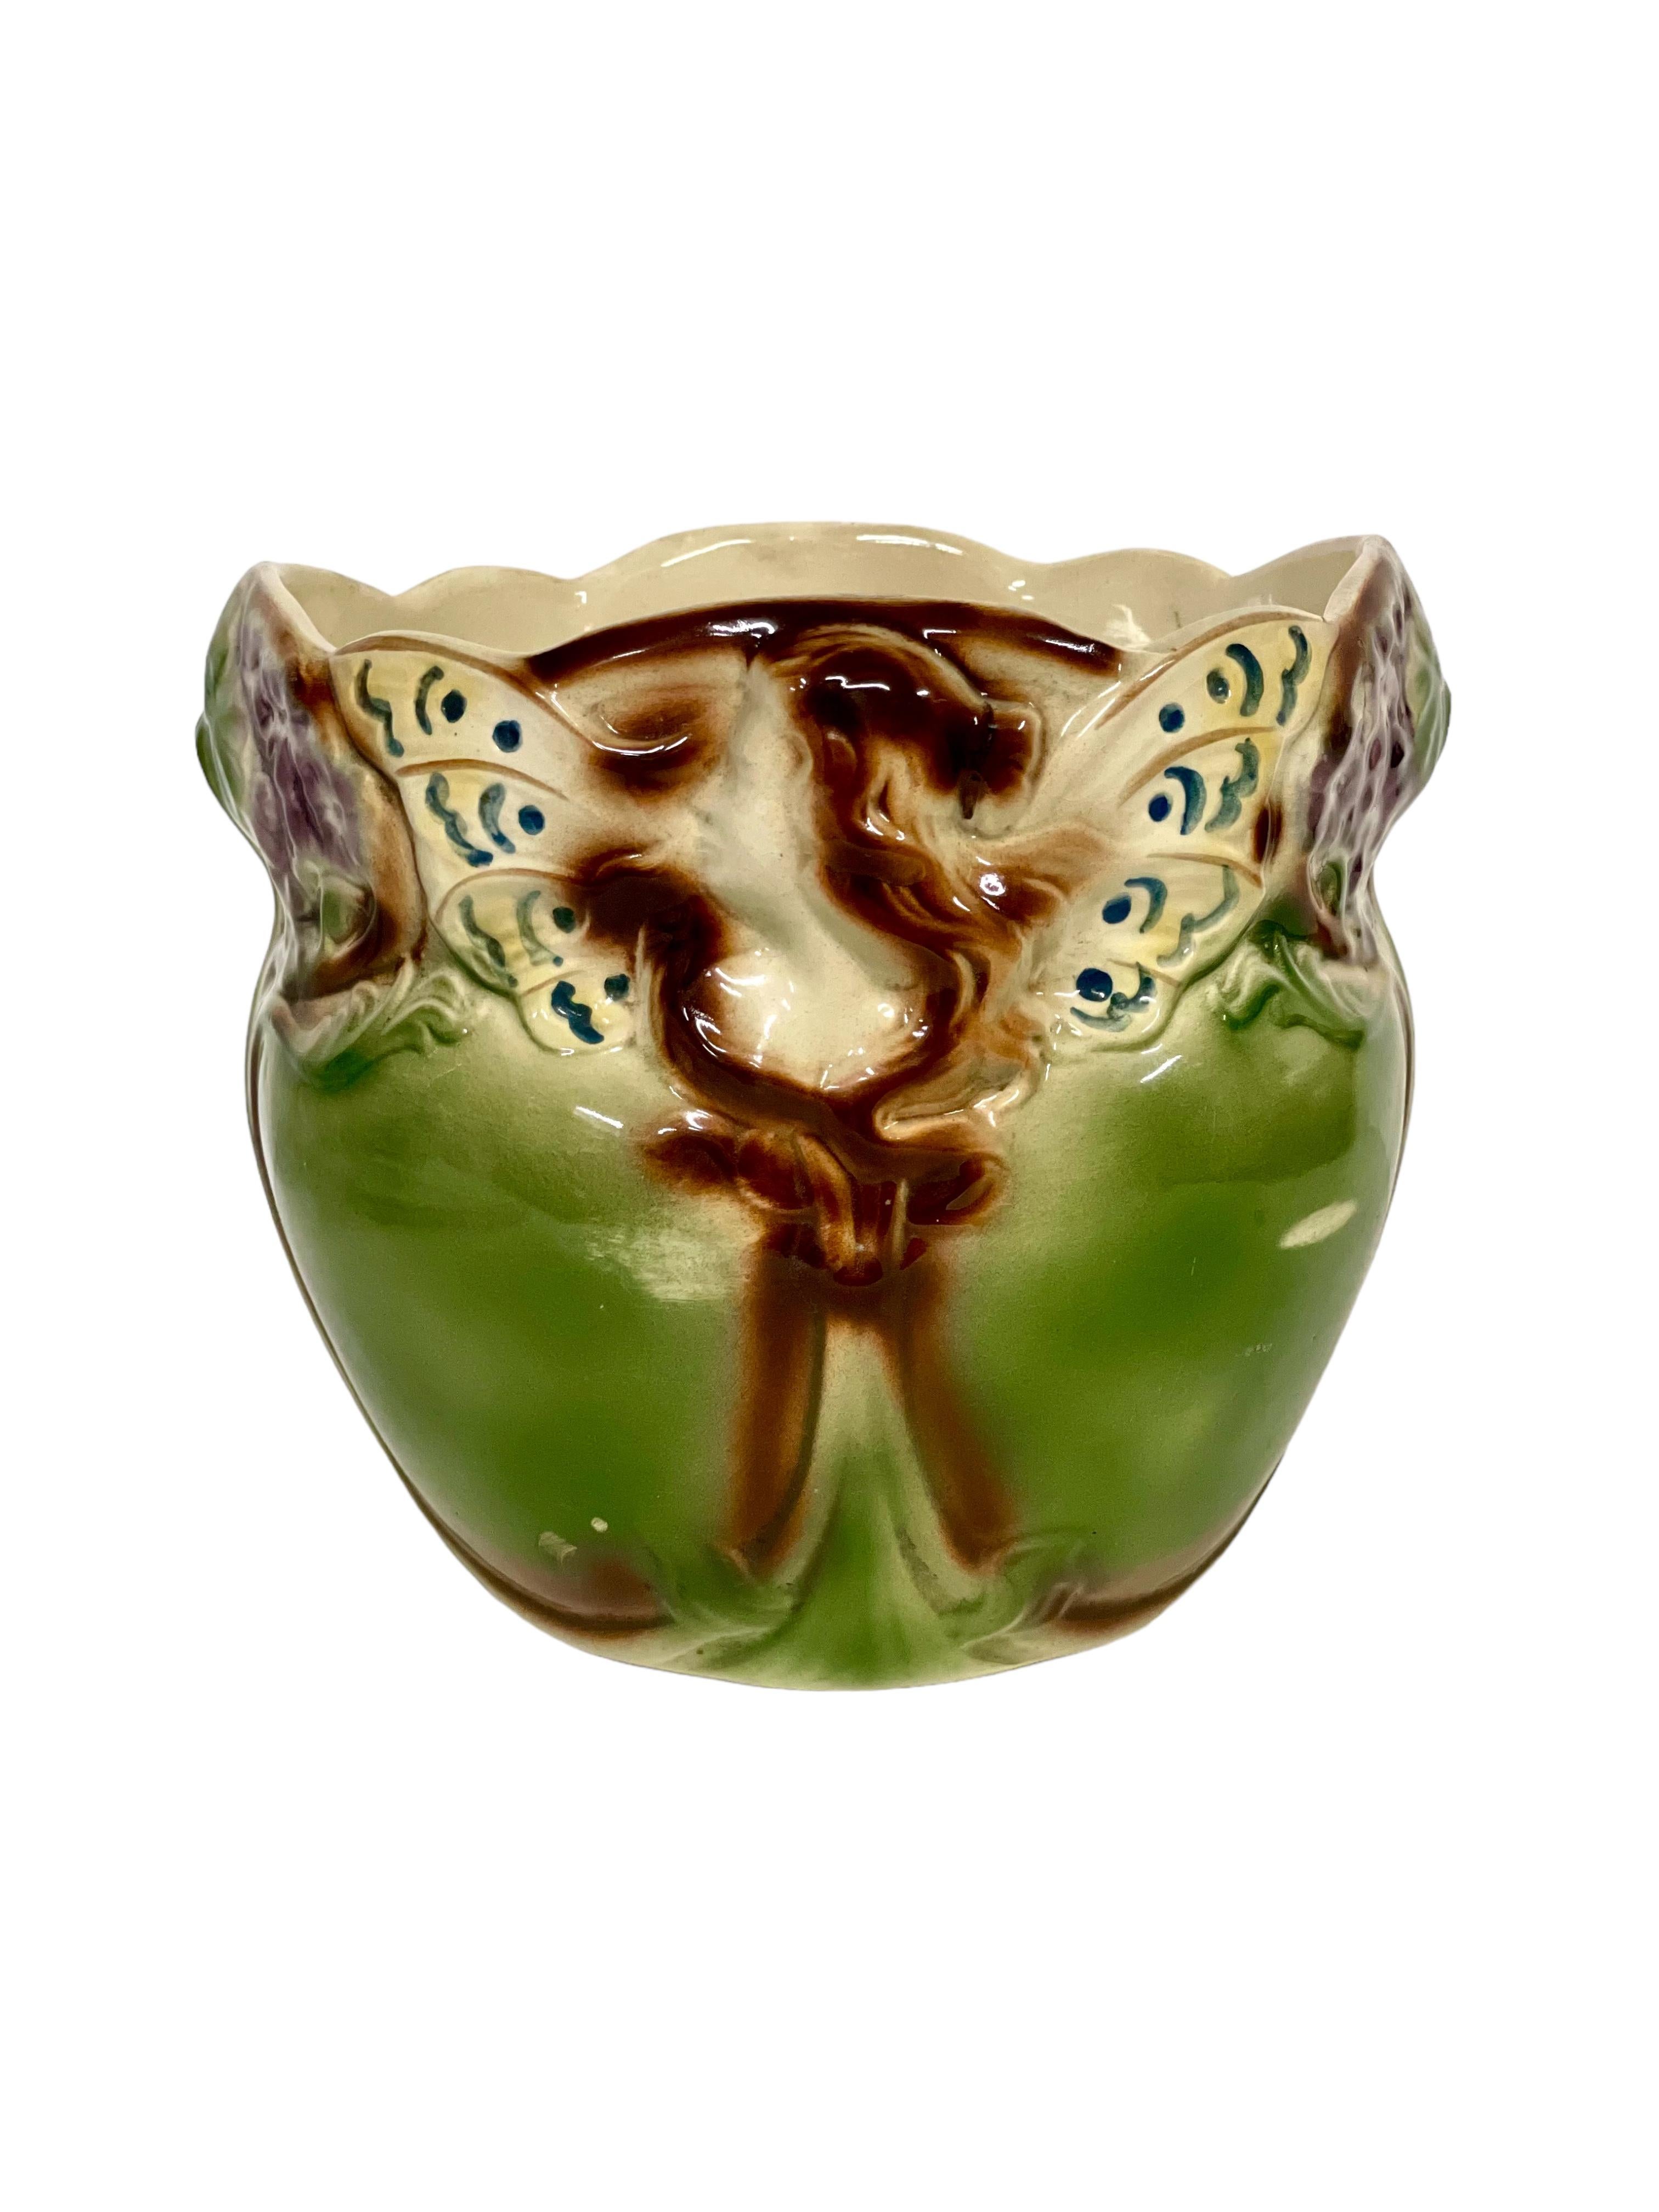 A pretty 19th century Majolica cache pot, decorated in shades of green and brown, and featuring the vivid colouration, whimsical shapes and high-relief sculpture typical of the style. Art Nouveau in design, this glazed earthenware pot would